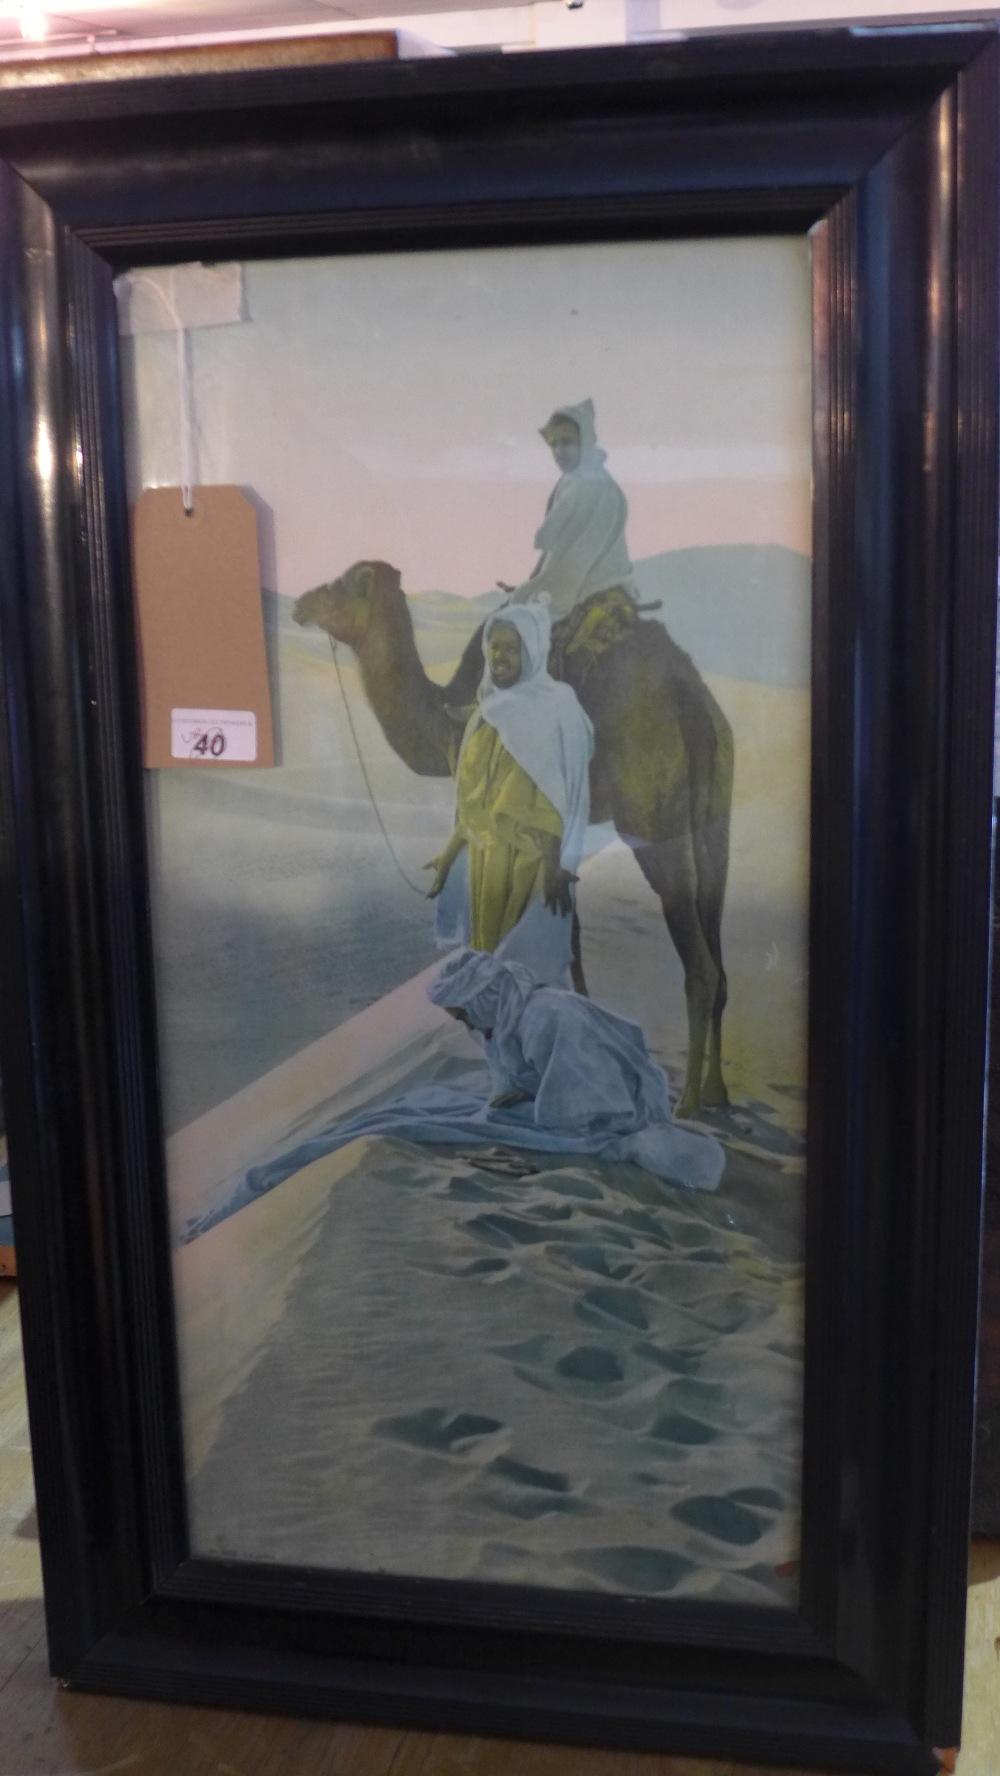 A print of three figures and a camel in the desert, published by La Piere, framed and glazed, 59 x